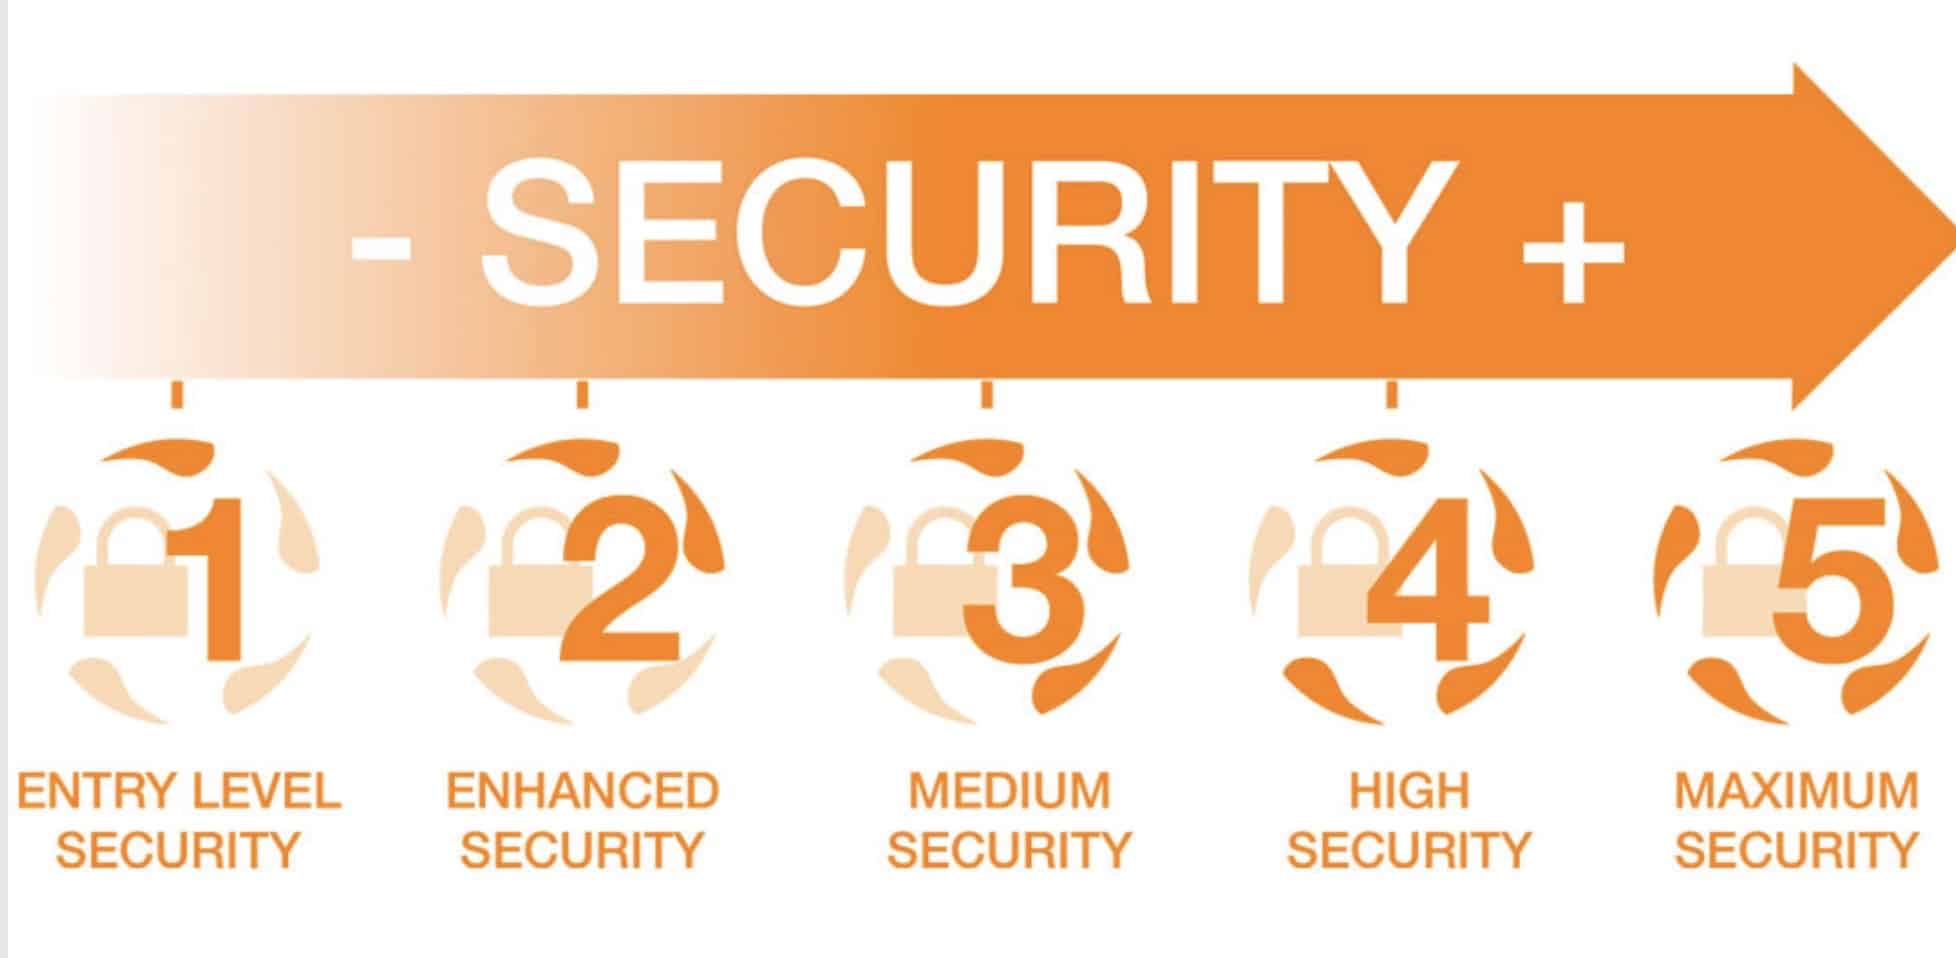 5 security levels